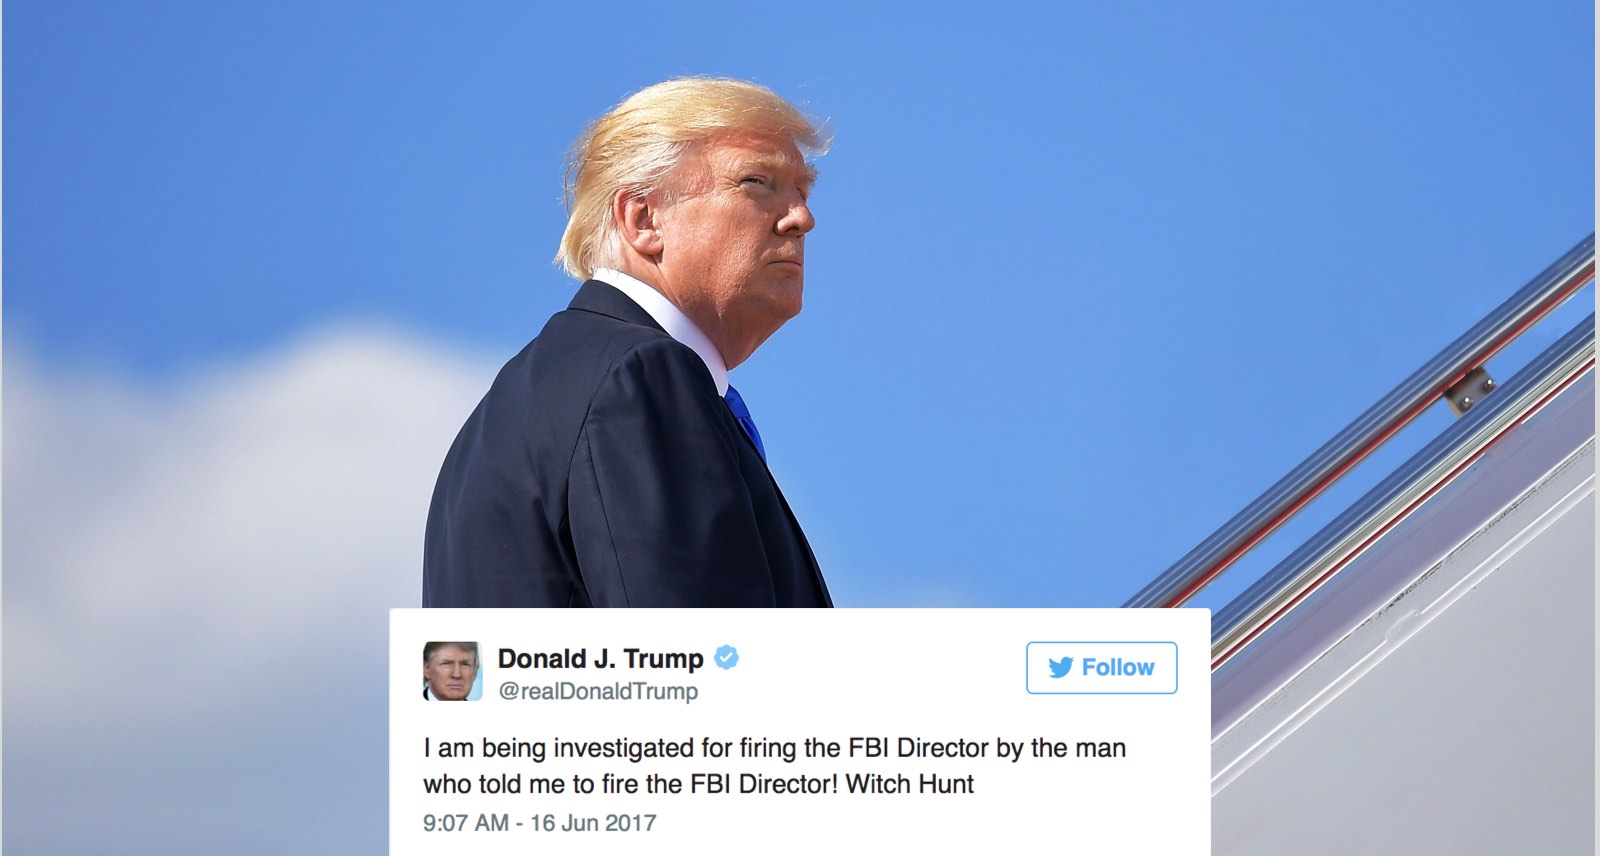 Donald Trump admits he's under investigation over his firing of James Comey